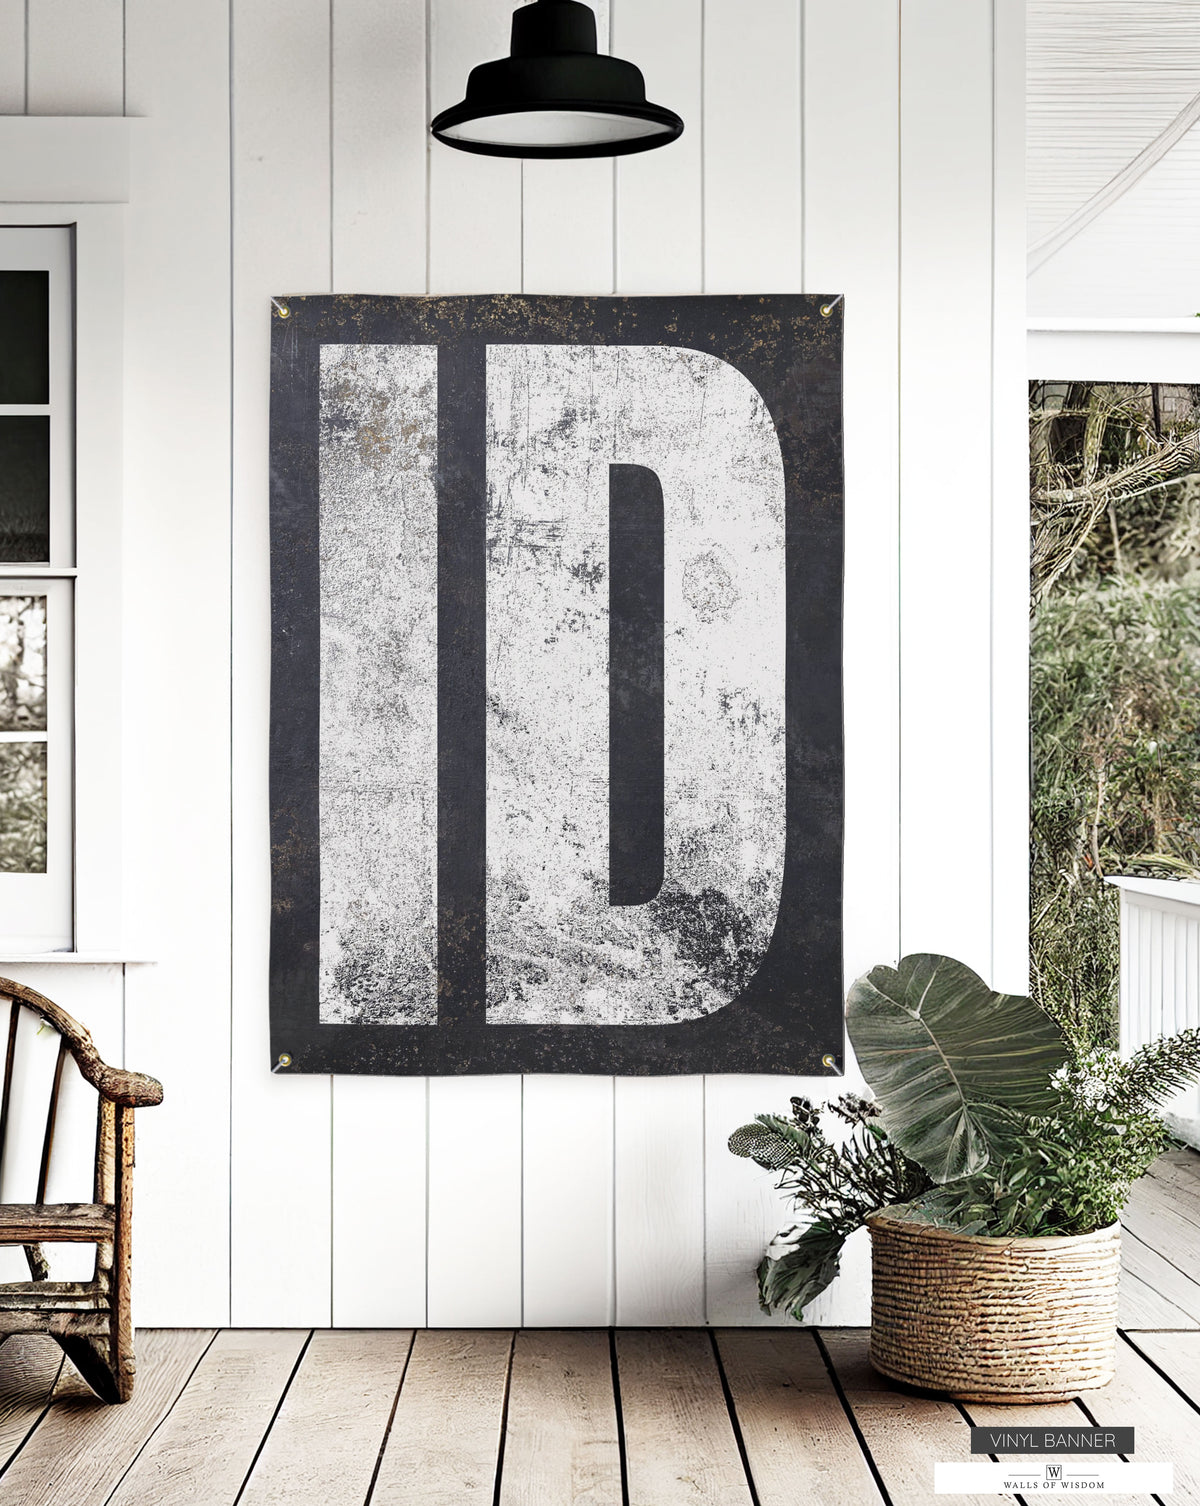 "Idaho-Themed Rustic Outdoor Decor: A vinyl porch sign that brings a touch of western elegance to any space, ideal as a moving state gift or to enhance your own Idaho home with rustic charm."